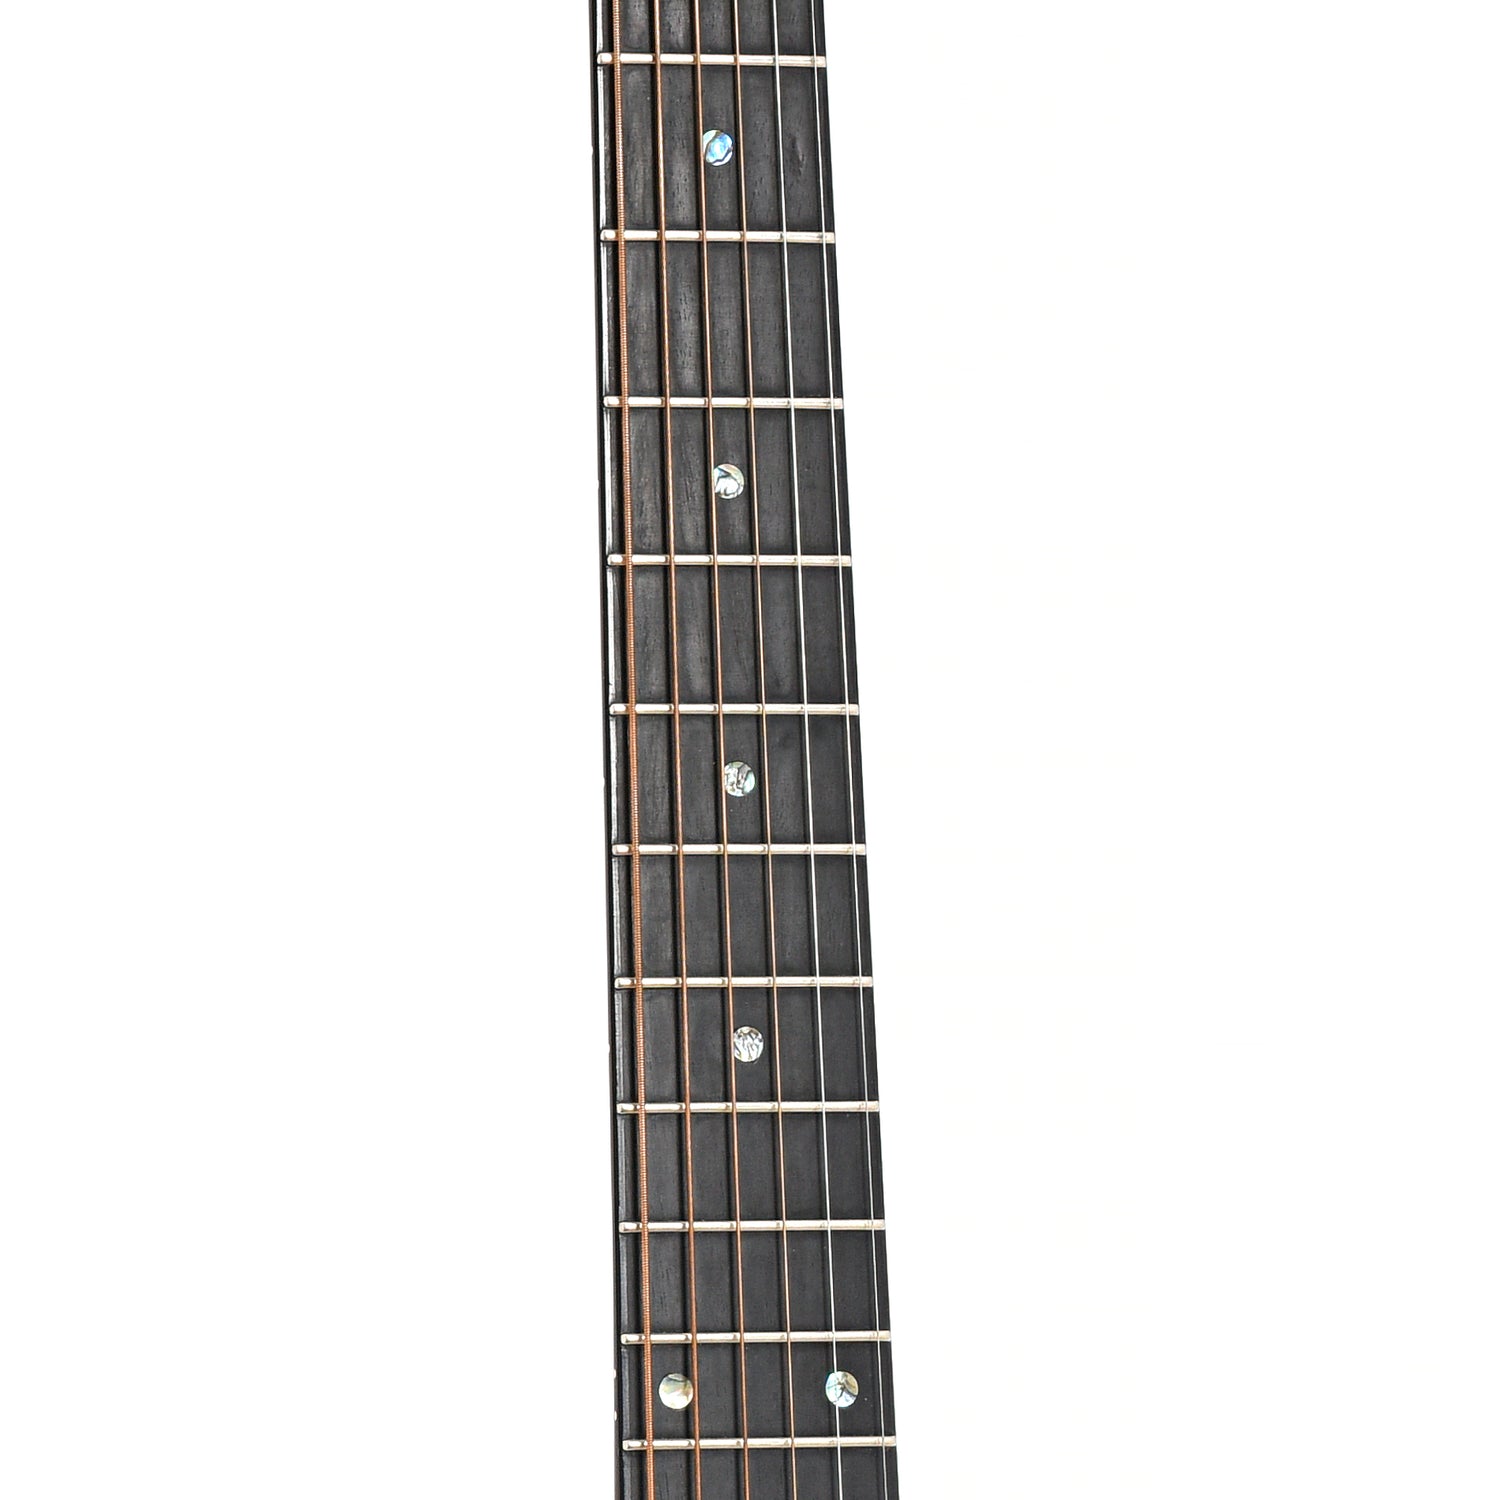 Fretboard of Taylor 710 Acoustic